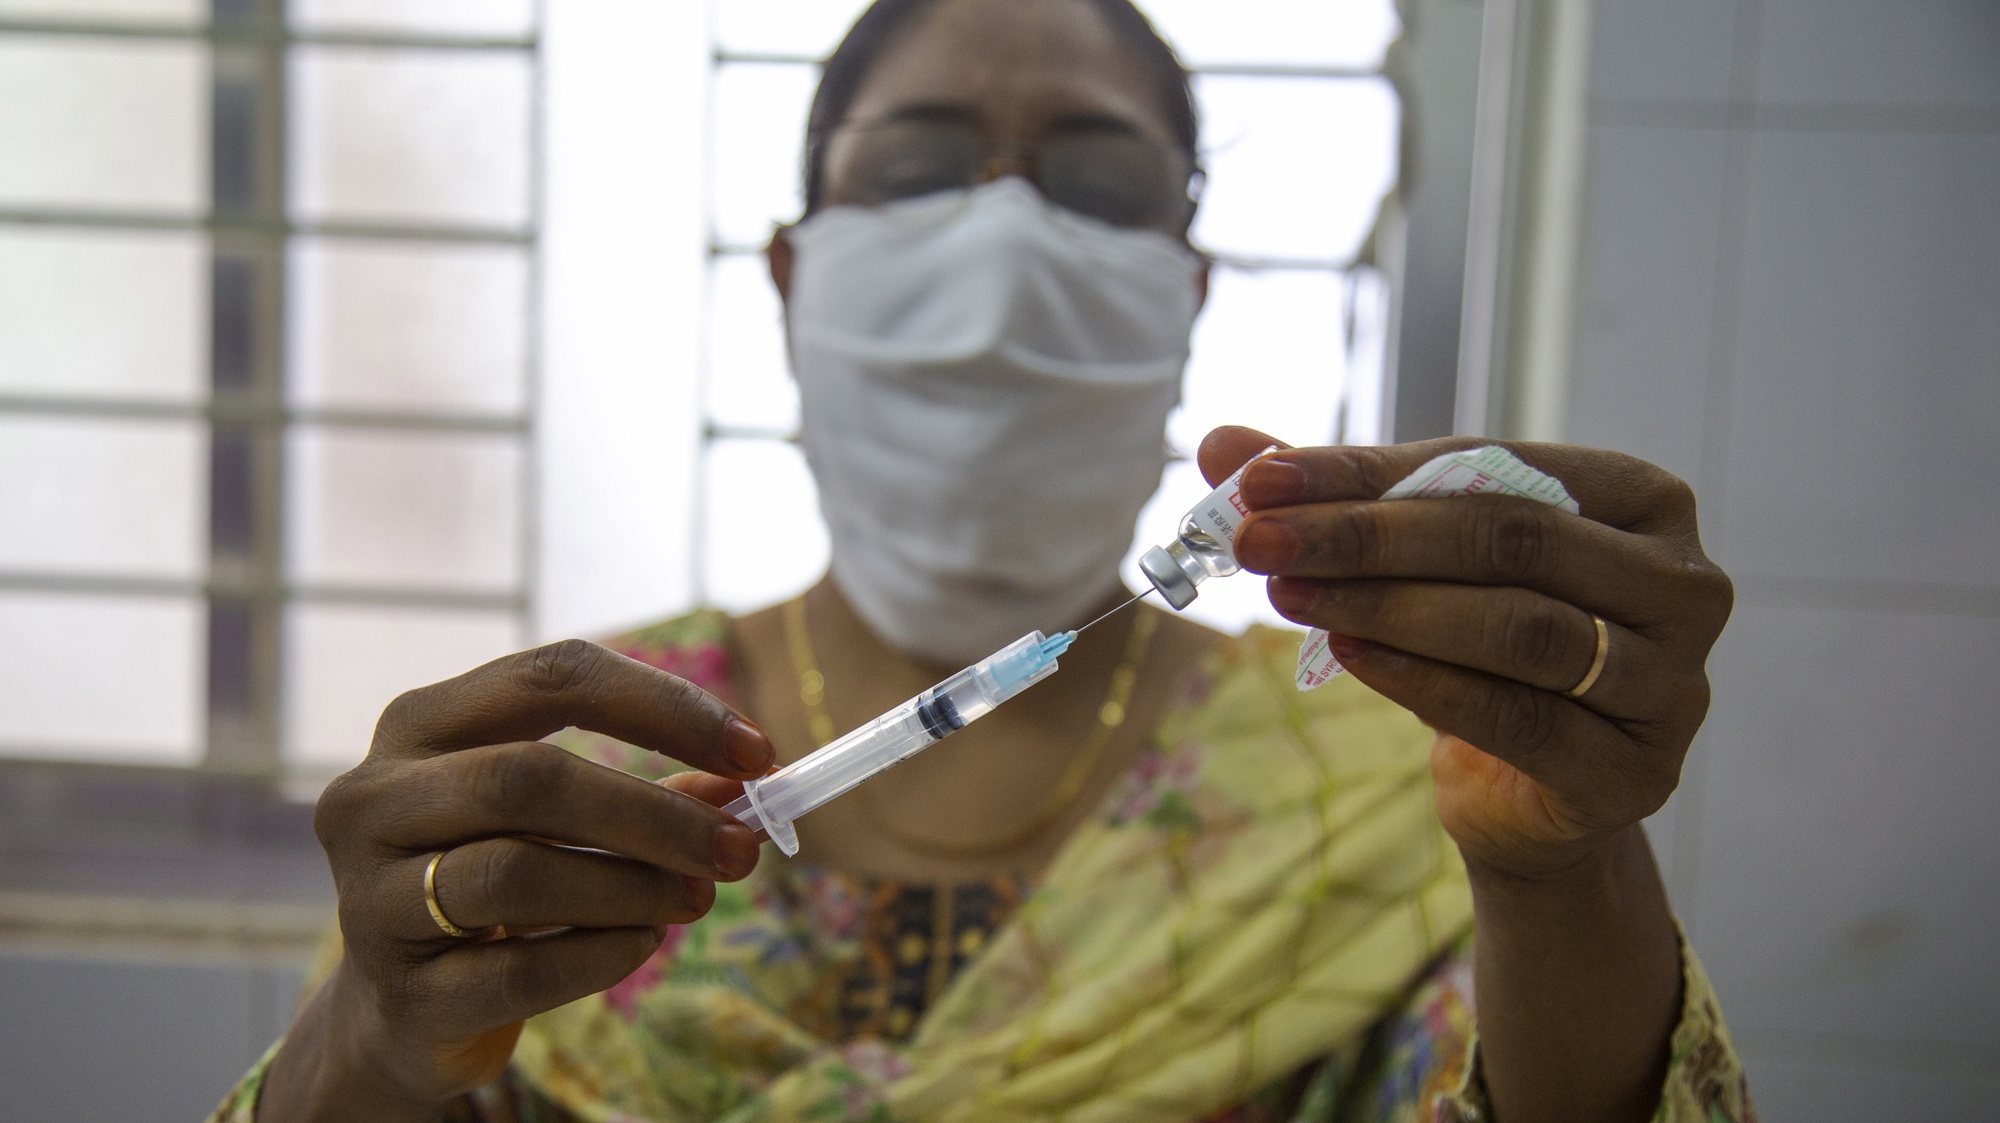 epa09397425 A health worker prepares a dose of the Sinopharm COVID19 vaccine during a vaccination campaign at the Keraniganj Upazila Health Complex on the outskirts of Dhaka, Bangladesh, 05 August 2021. According to the Bangladesh Directorate General of Health Services (DGHS), the nationwide mass vaccination program will be starting on 14 August. Bangladesh has recorded nearly 1.31 million coronavirus infections and 21,638 fatalities since the pandemic began.  EPA/MONIRUL ALAM